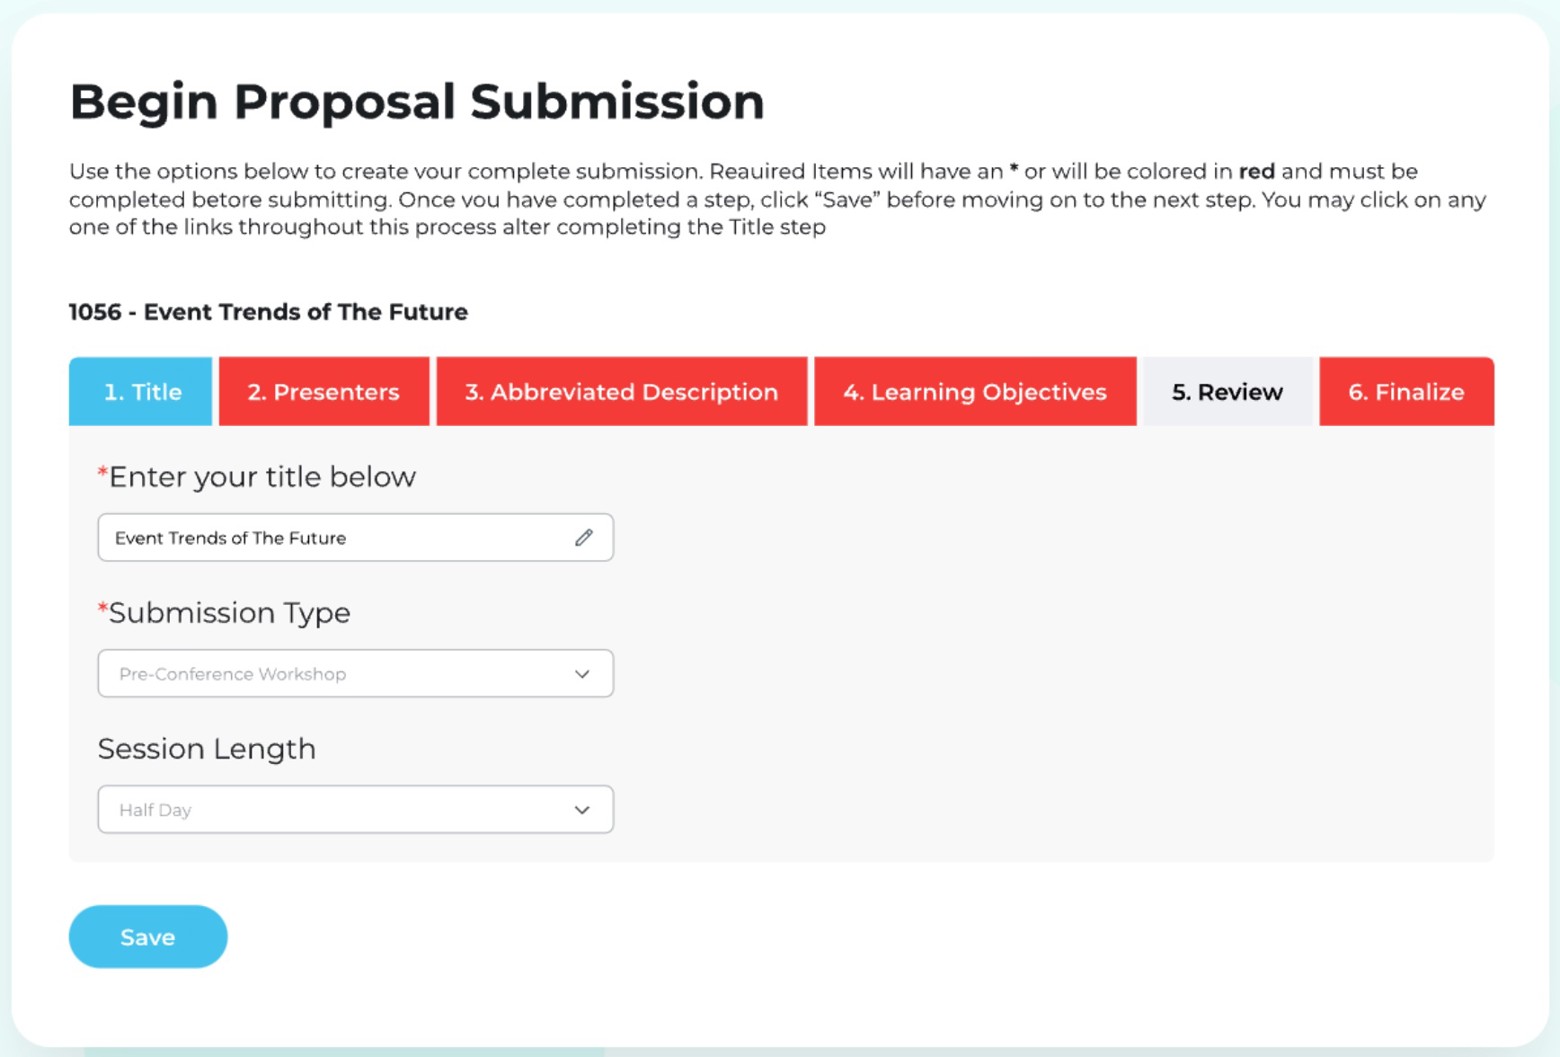 Proposal submission screenshot of Attendee Interactive